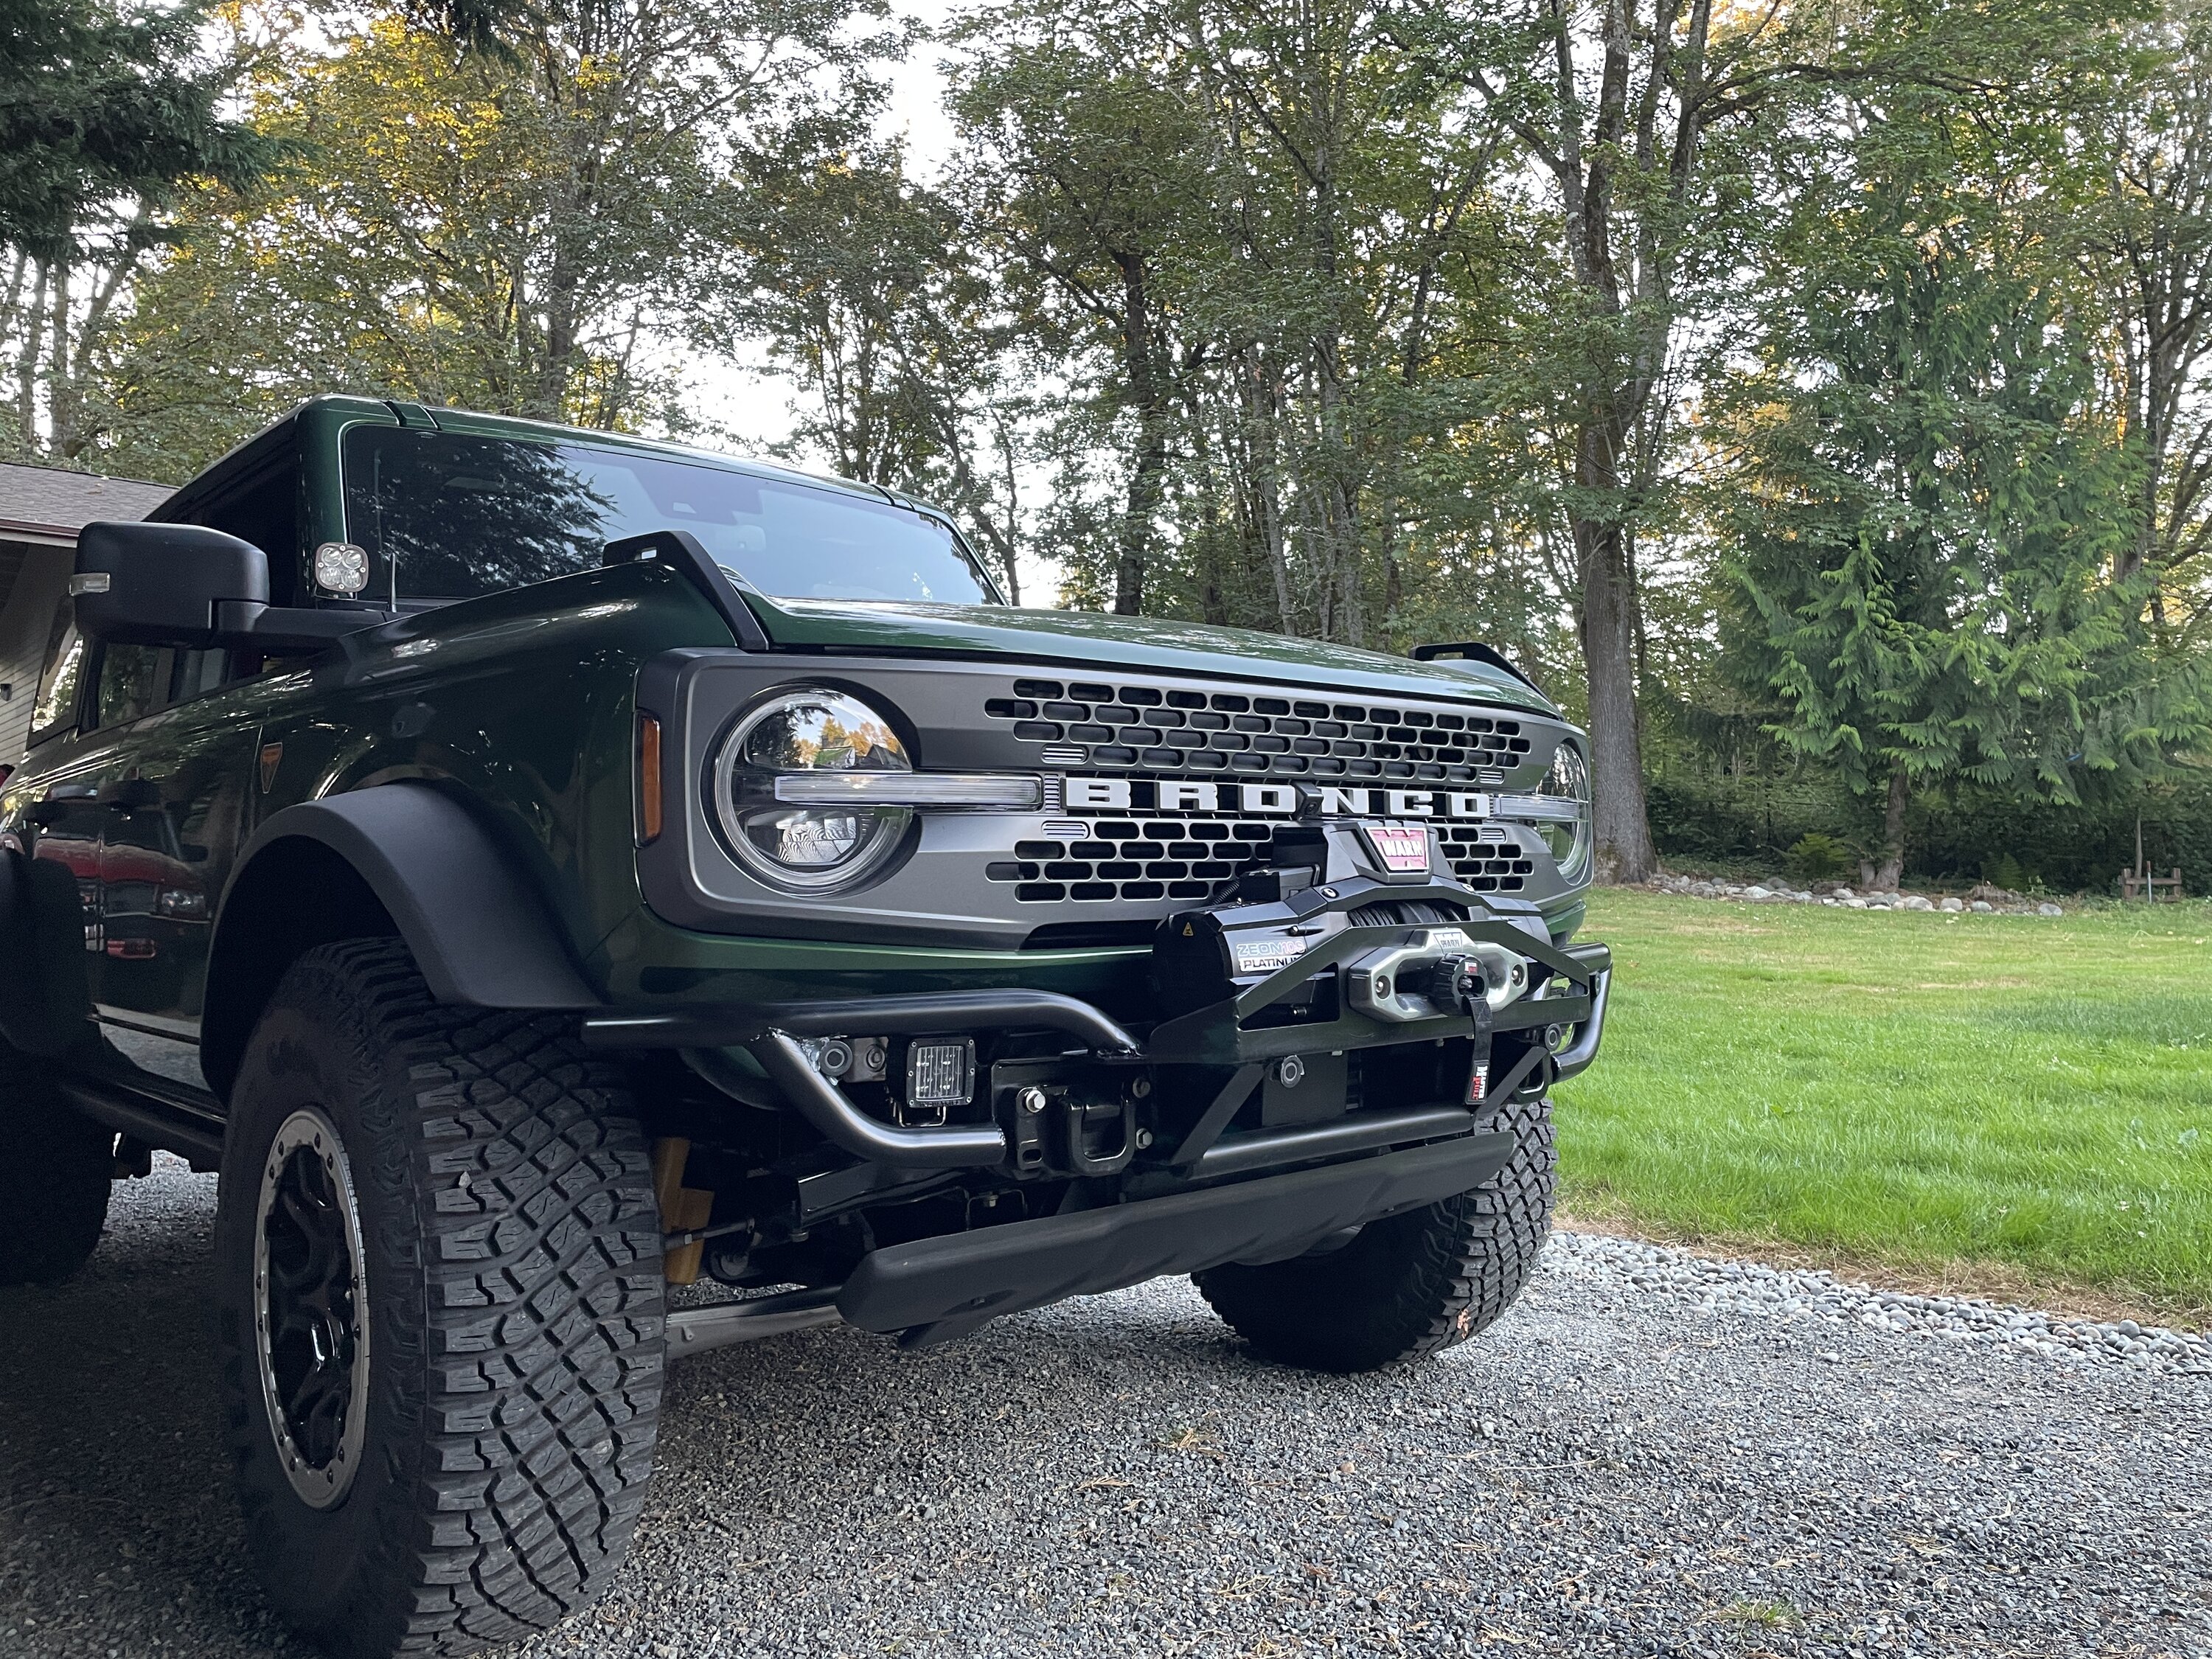 Ford Bronco My solution for a winch bumper 3A7C4C38-F5A5-4EAE-9D1D-25BDFBB32E1C